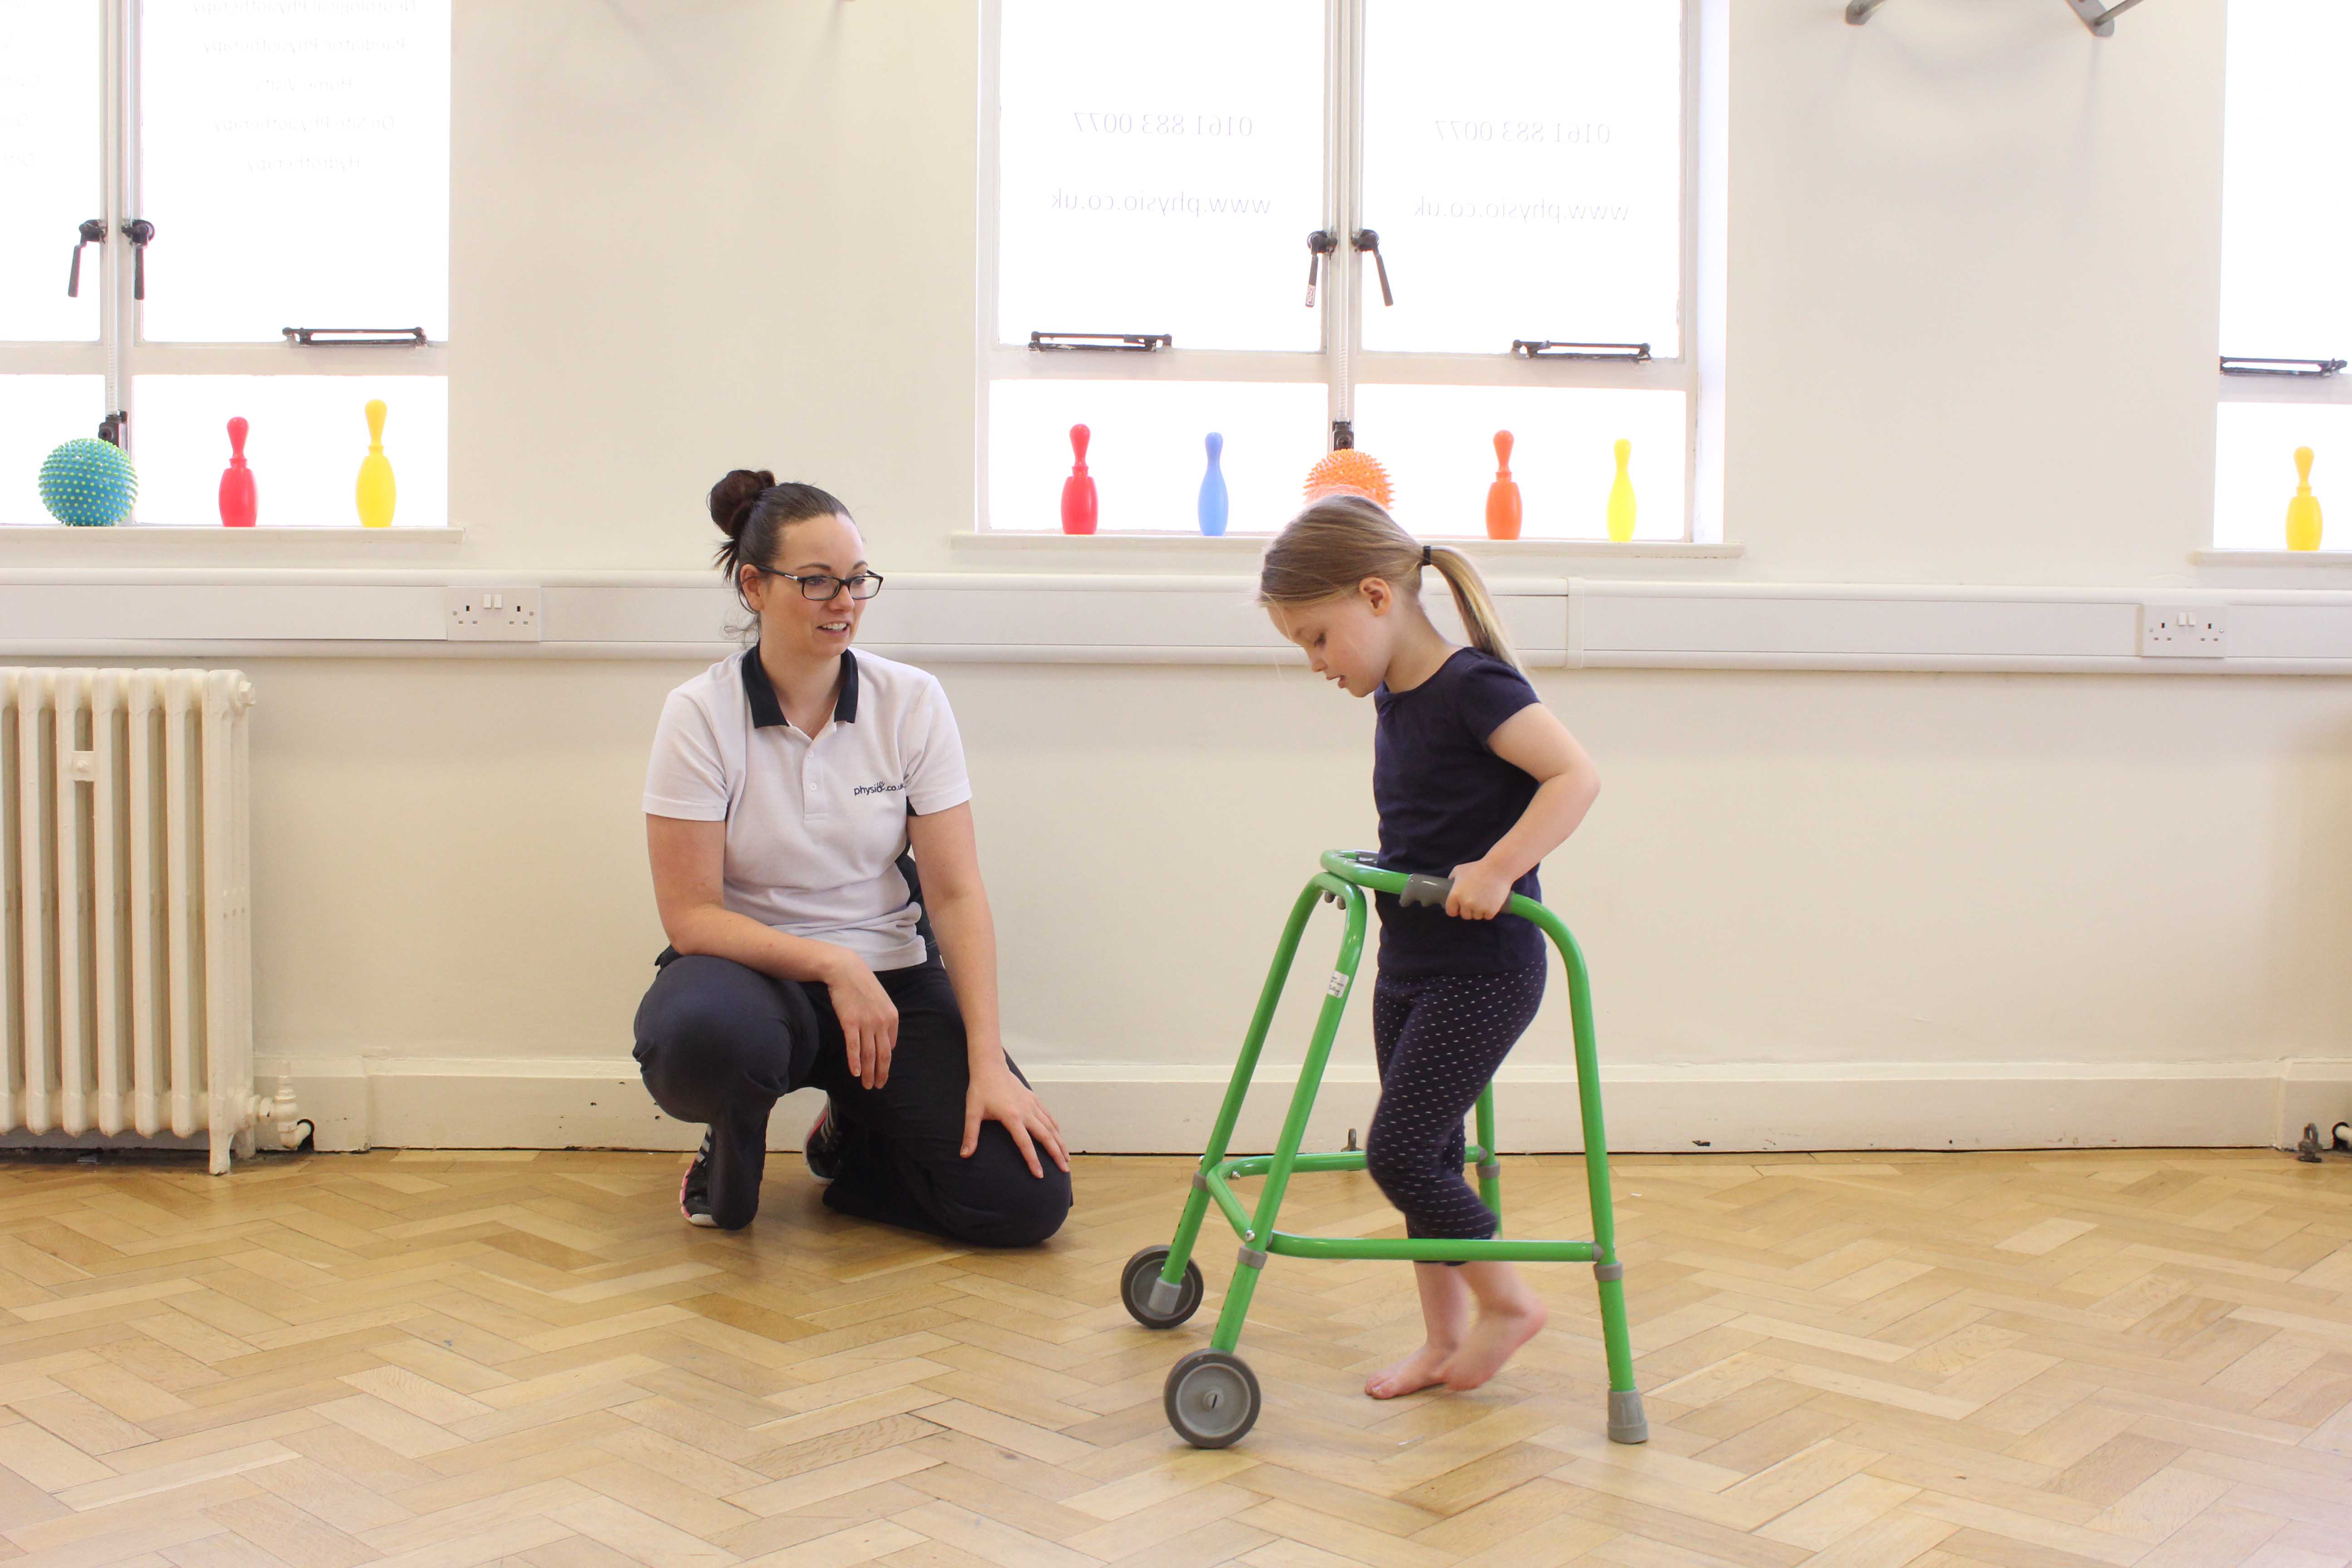 Mobility exercises using a wheeled walking frame under supervision of a paediatric physiotherapist